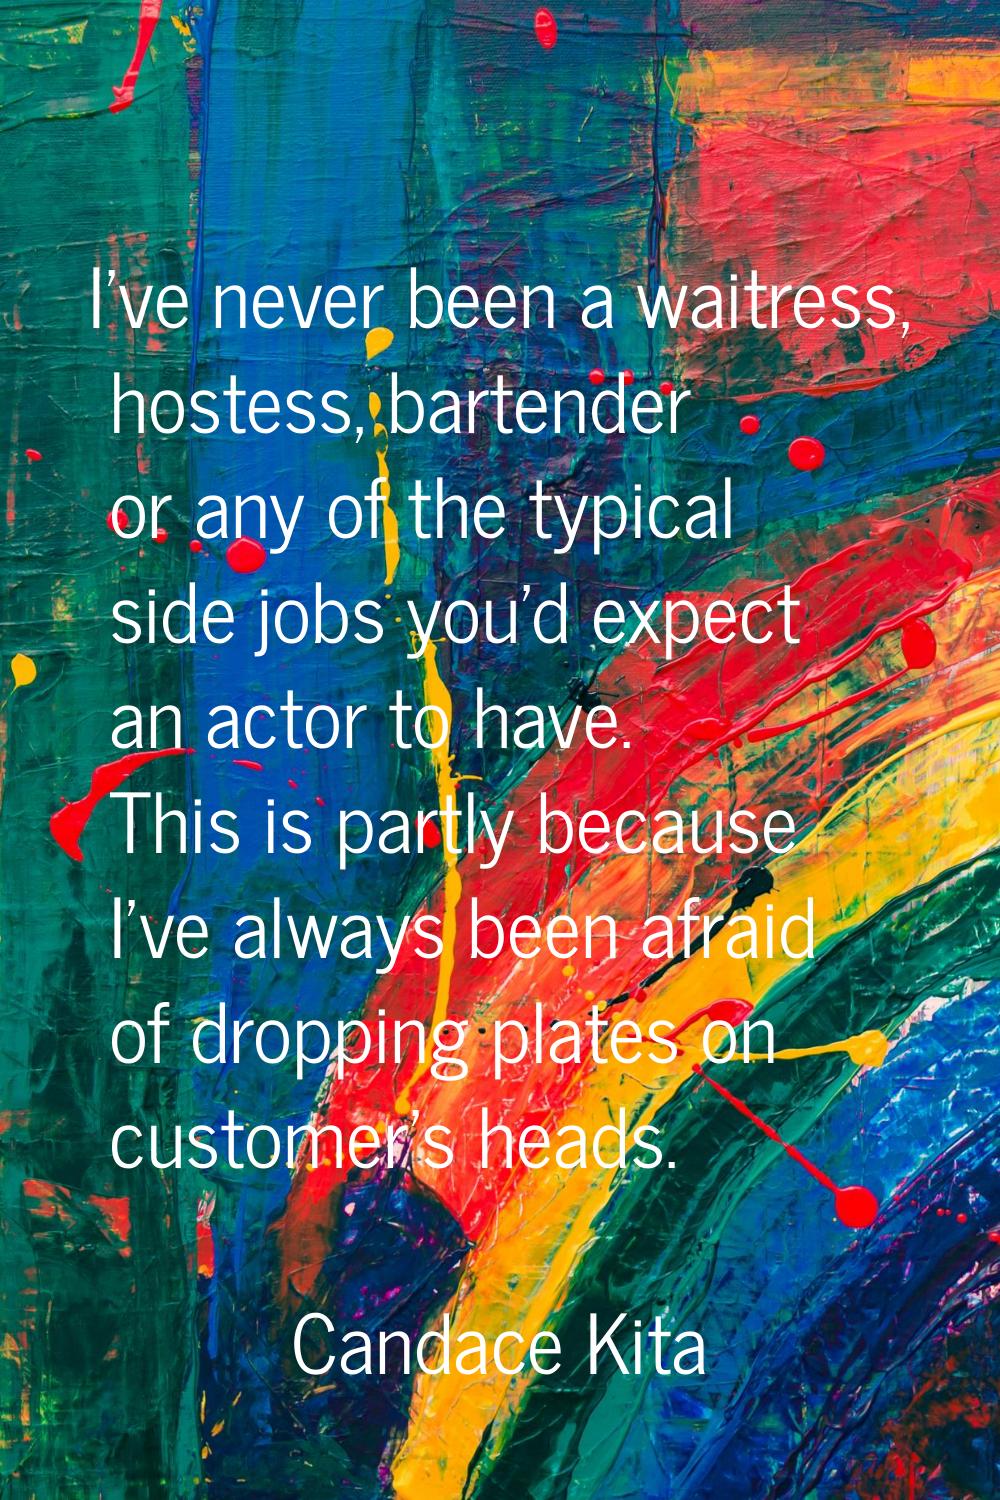 I've never been a waitress, hostess, bartender or any of the typical side jobs you'd expect an acto